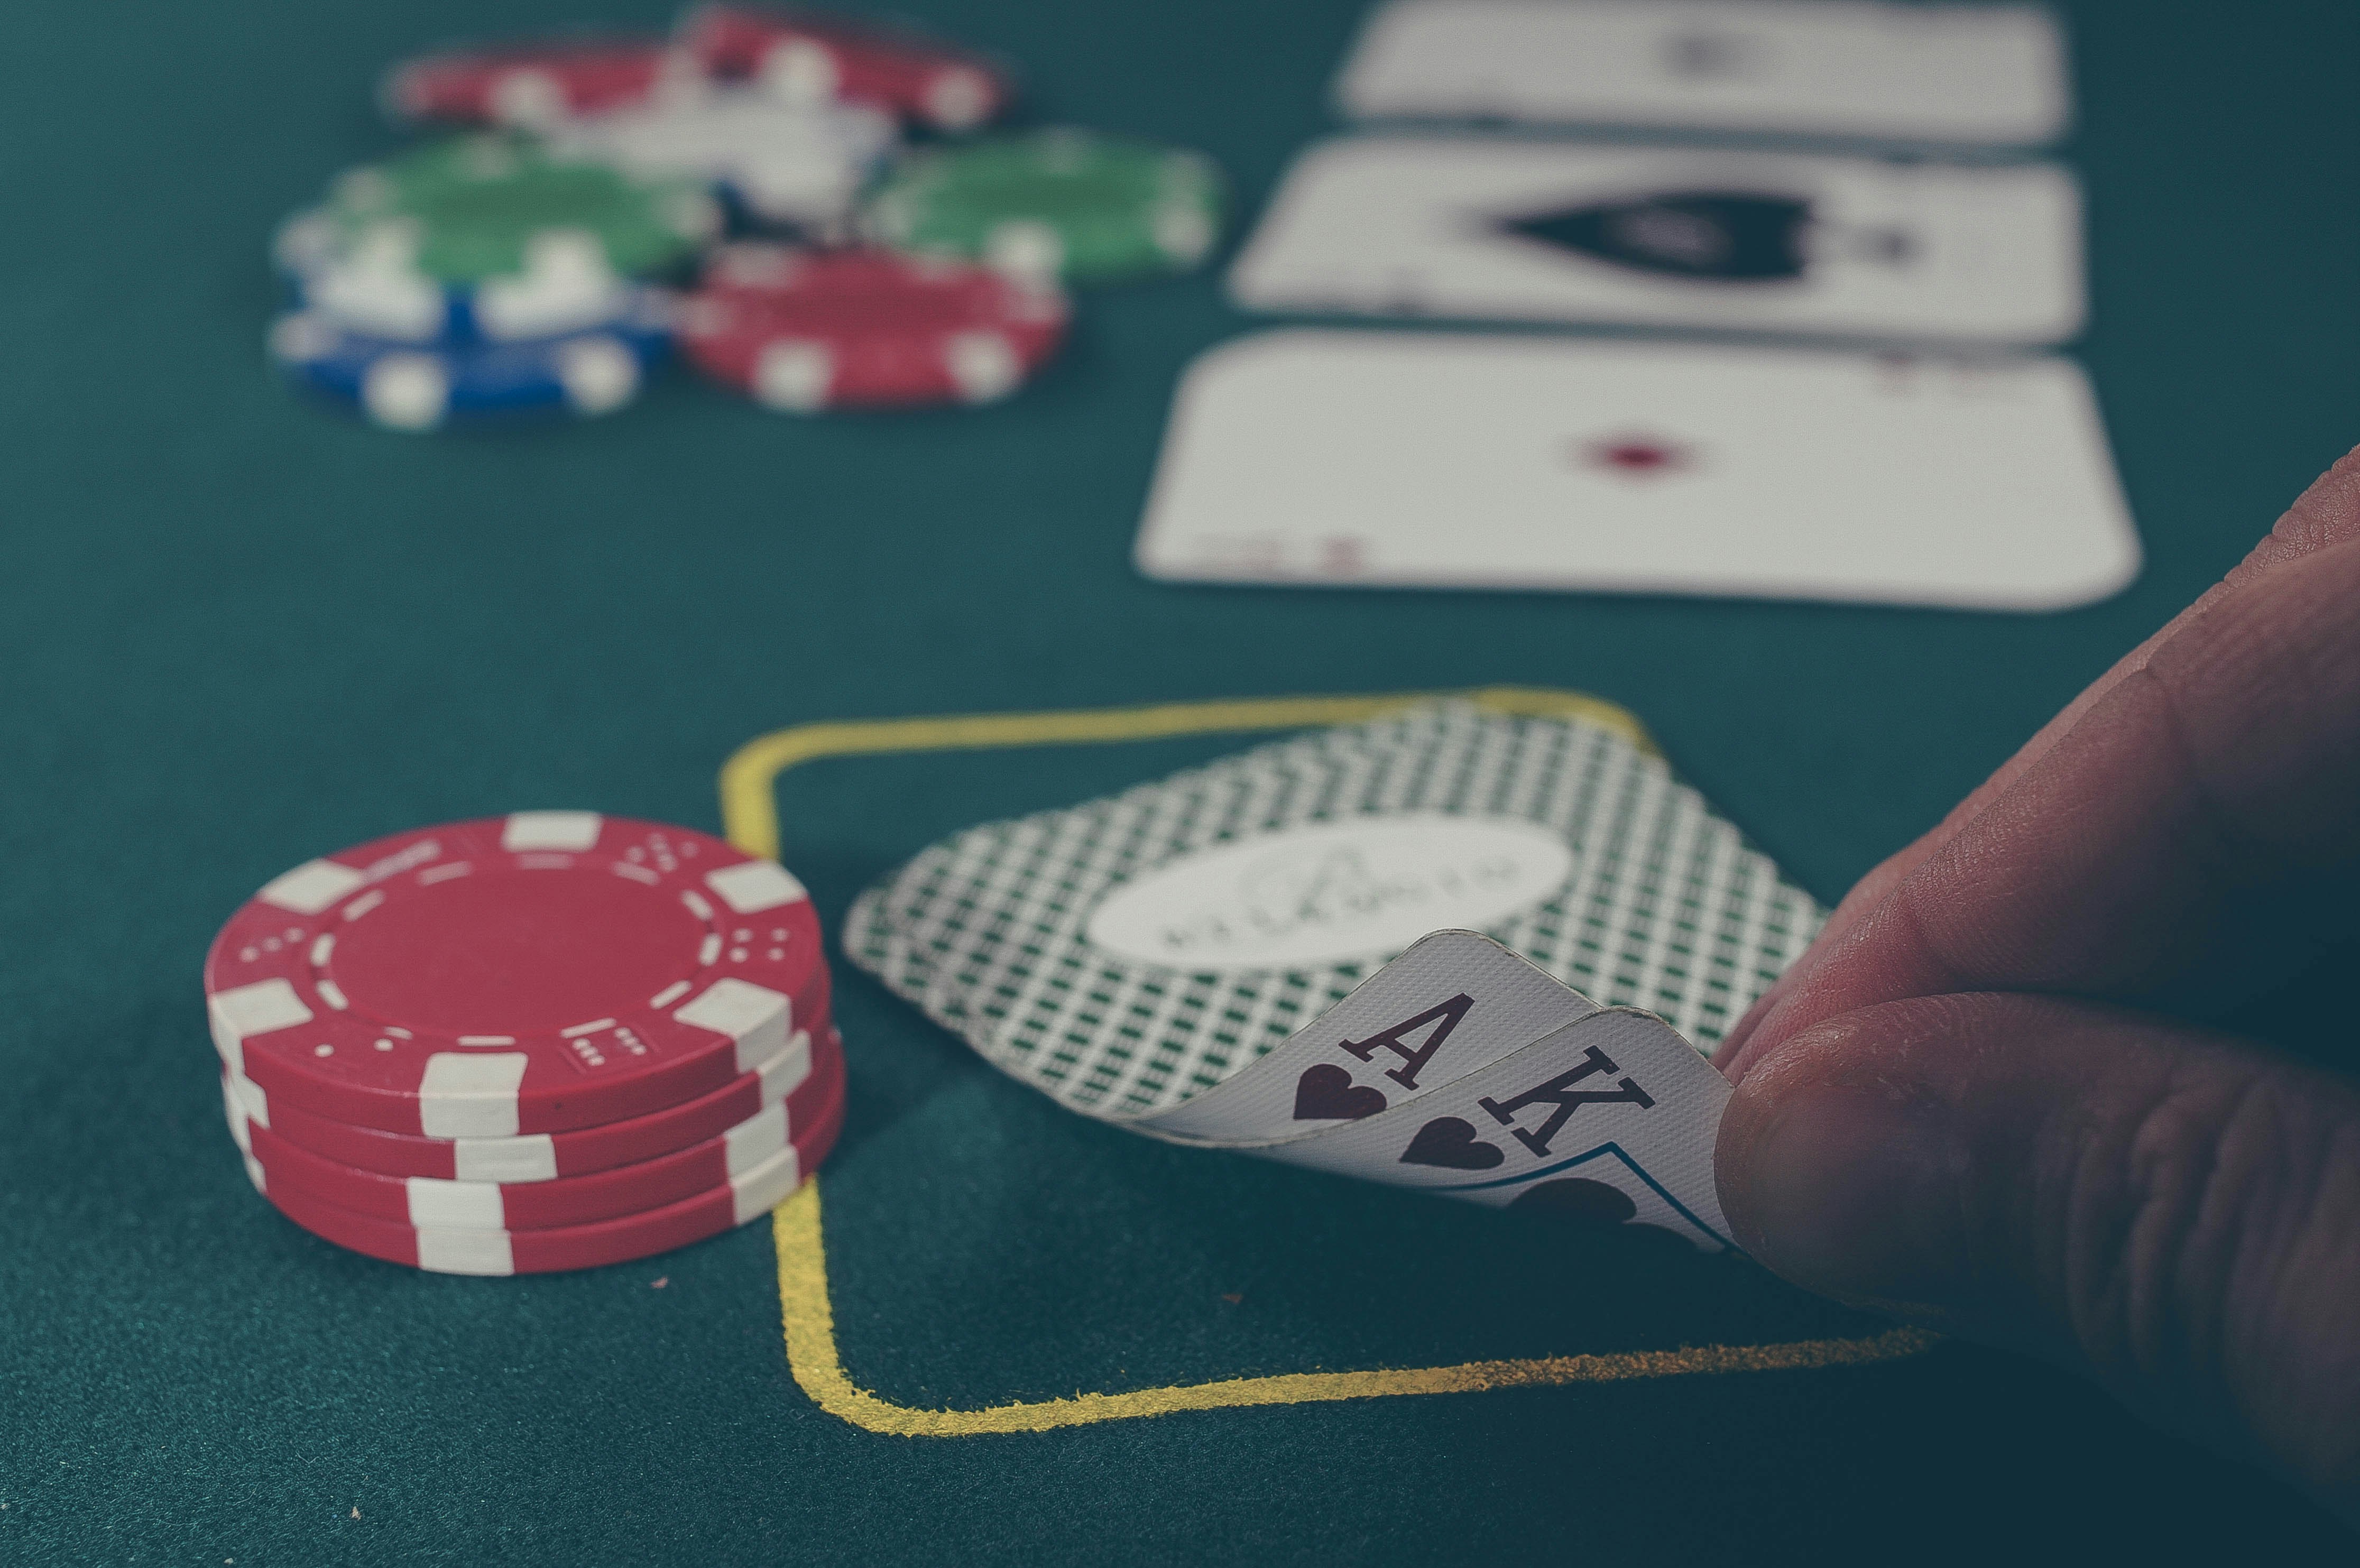 Image shows a poker table with fingers holding a card and some playing pieces